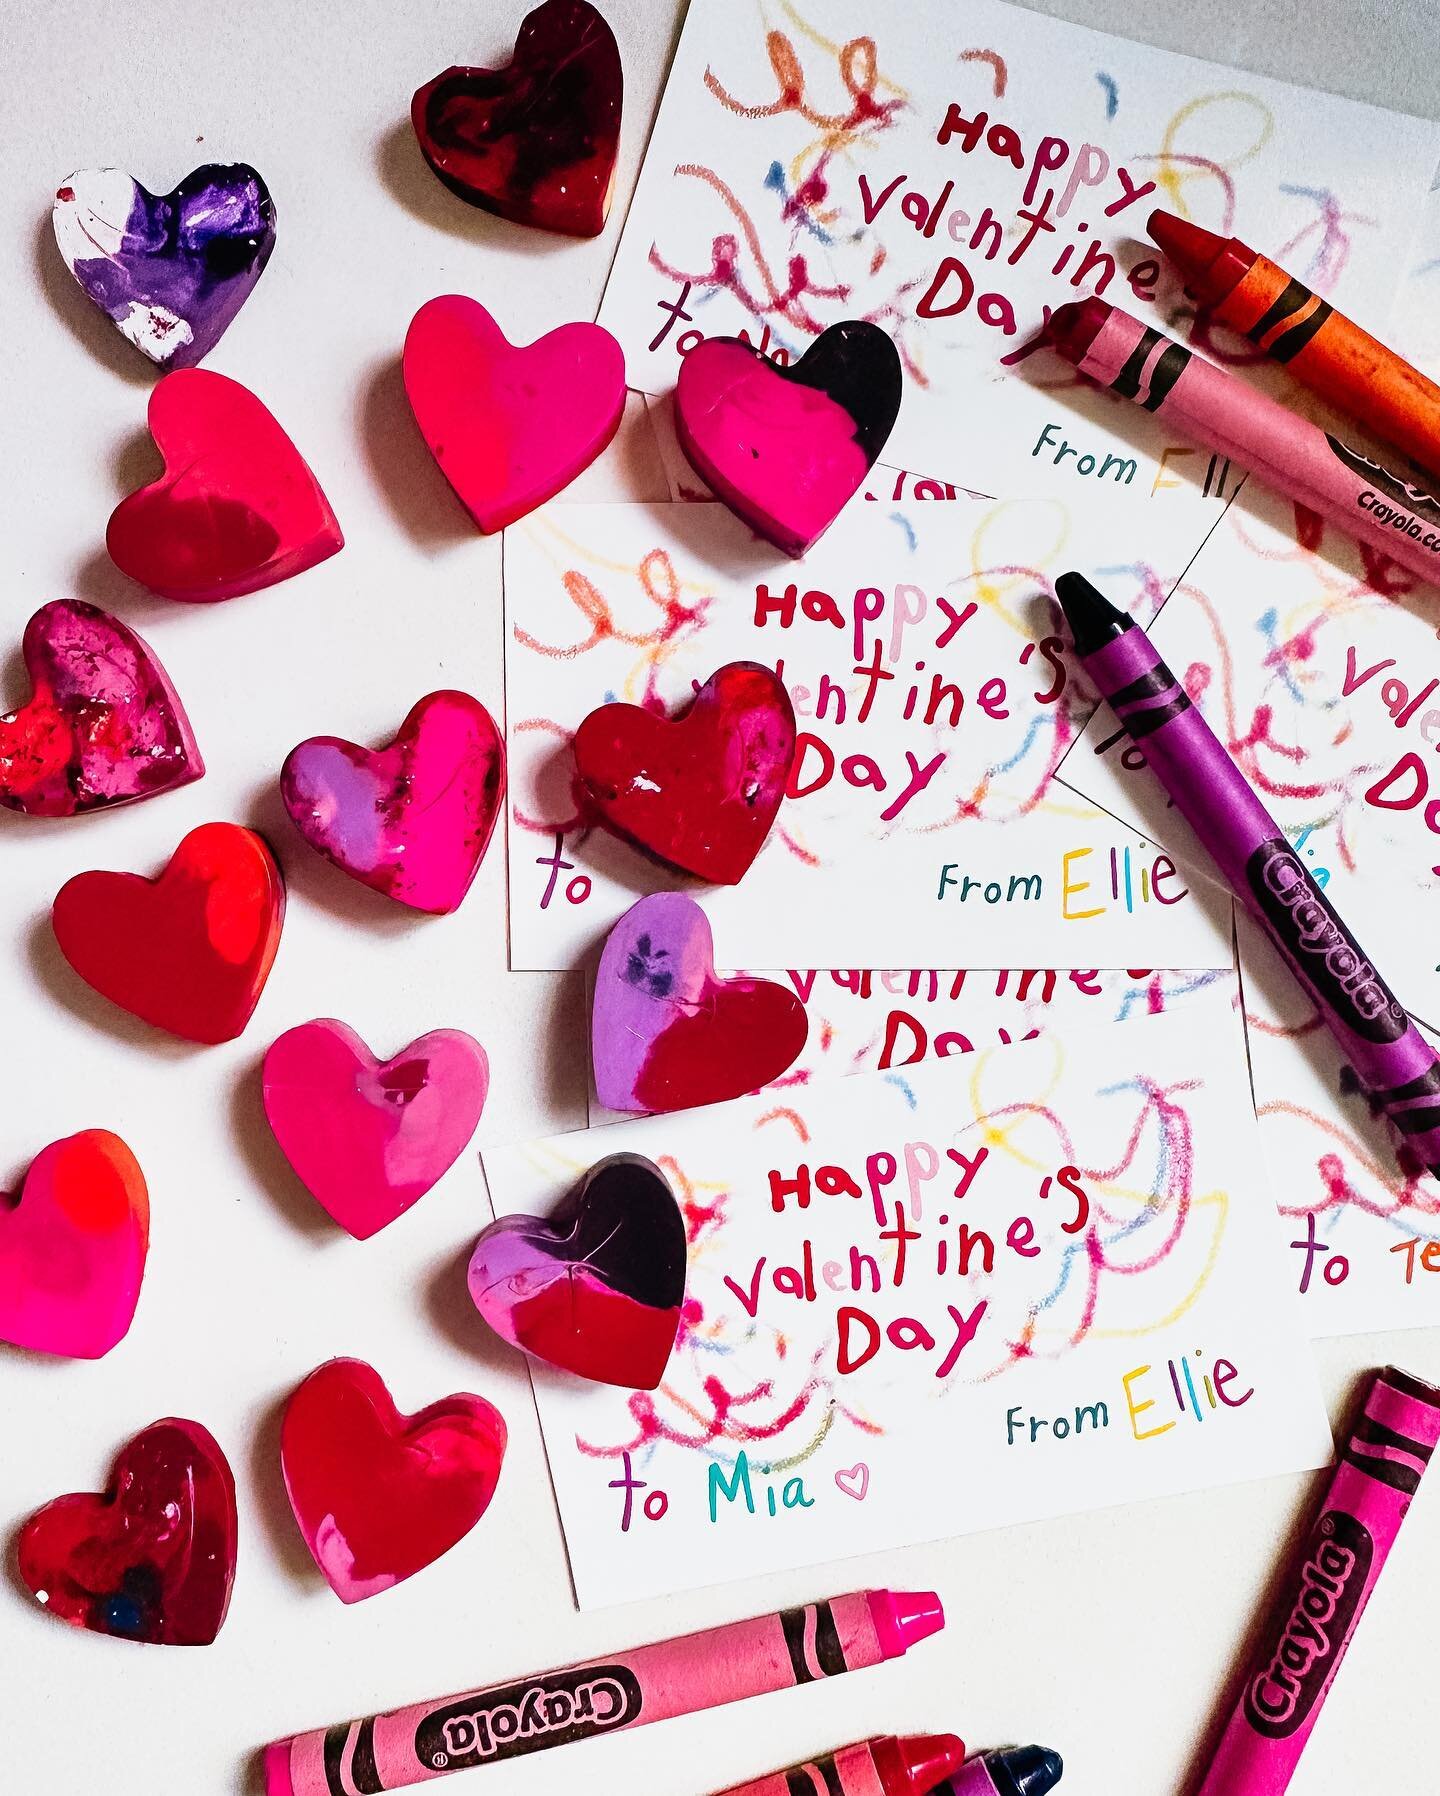 Happy Valentine&rsquo;s Day everyone!
💜🤍❤️💜🤍❤️
We decided to make our own Valentine&rsquo;s Day cards and crayons using a silicone mold from the dollar store and some of our crayons! 
When we ran out&hellip; I ran to staples to pick my own tin of